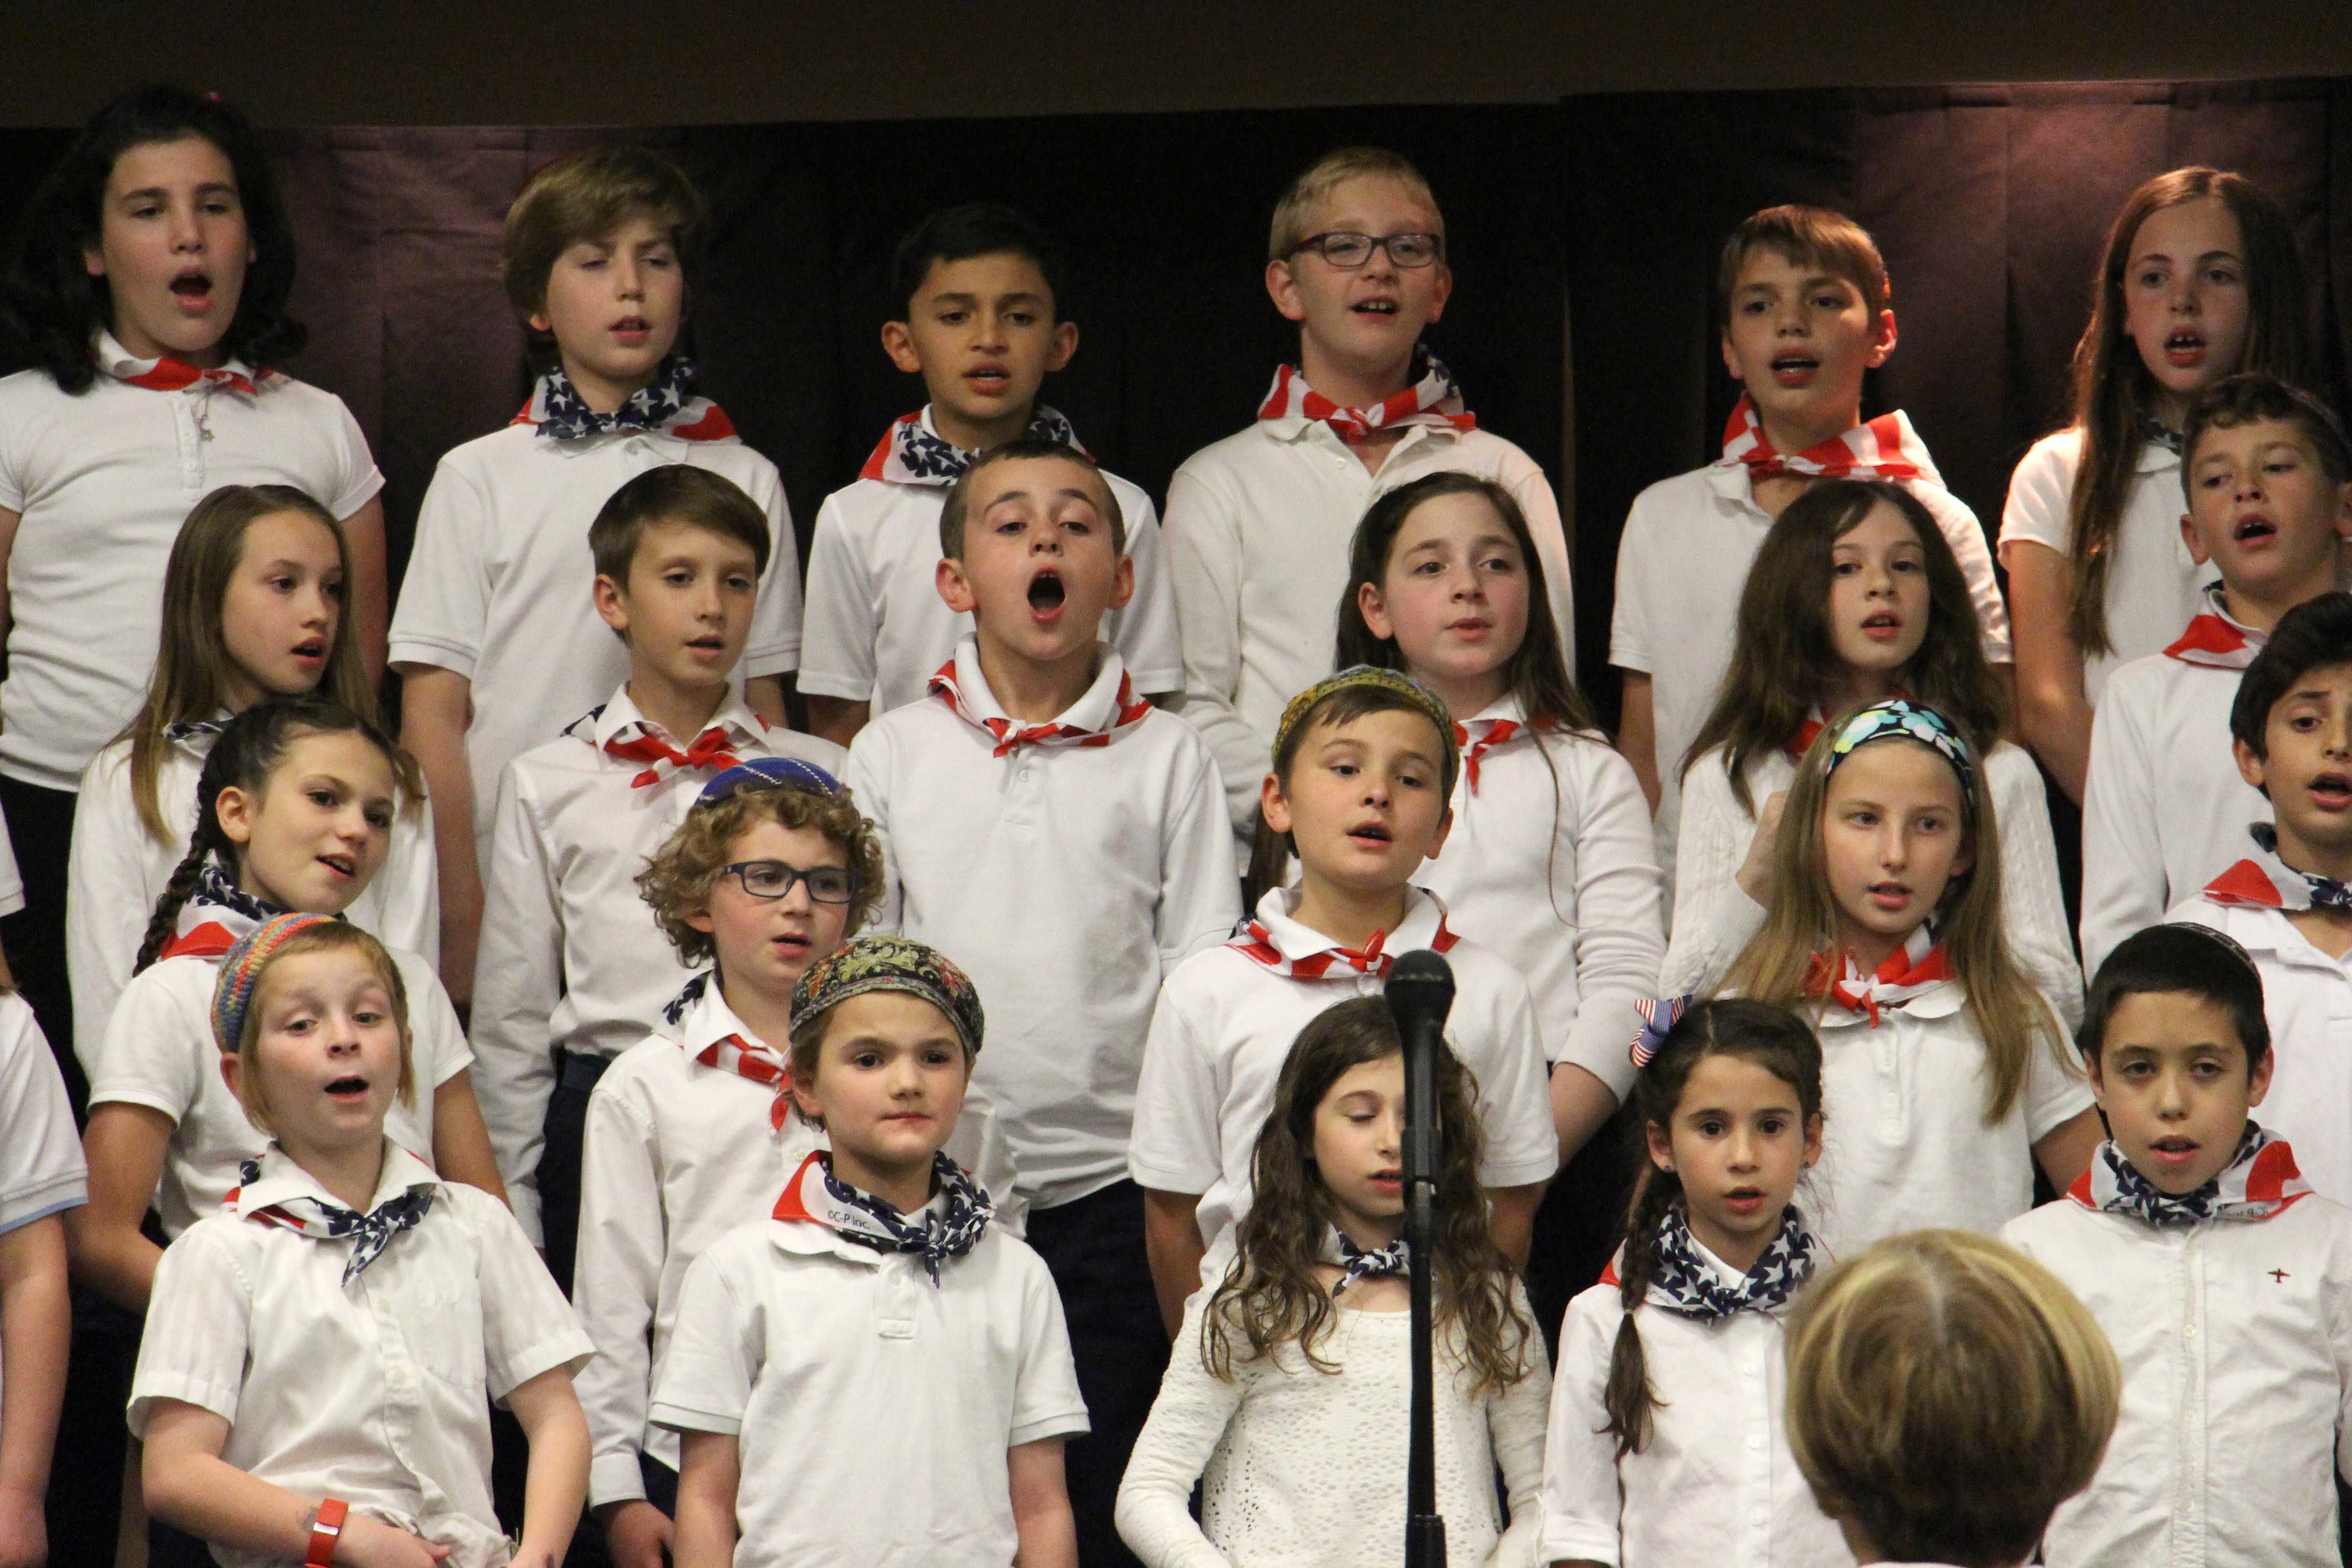 Fourth and fifth graders showed off their knowledge though song at the beginning of State Fair. Photo by Debi Davis.